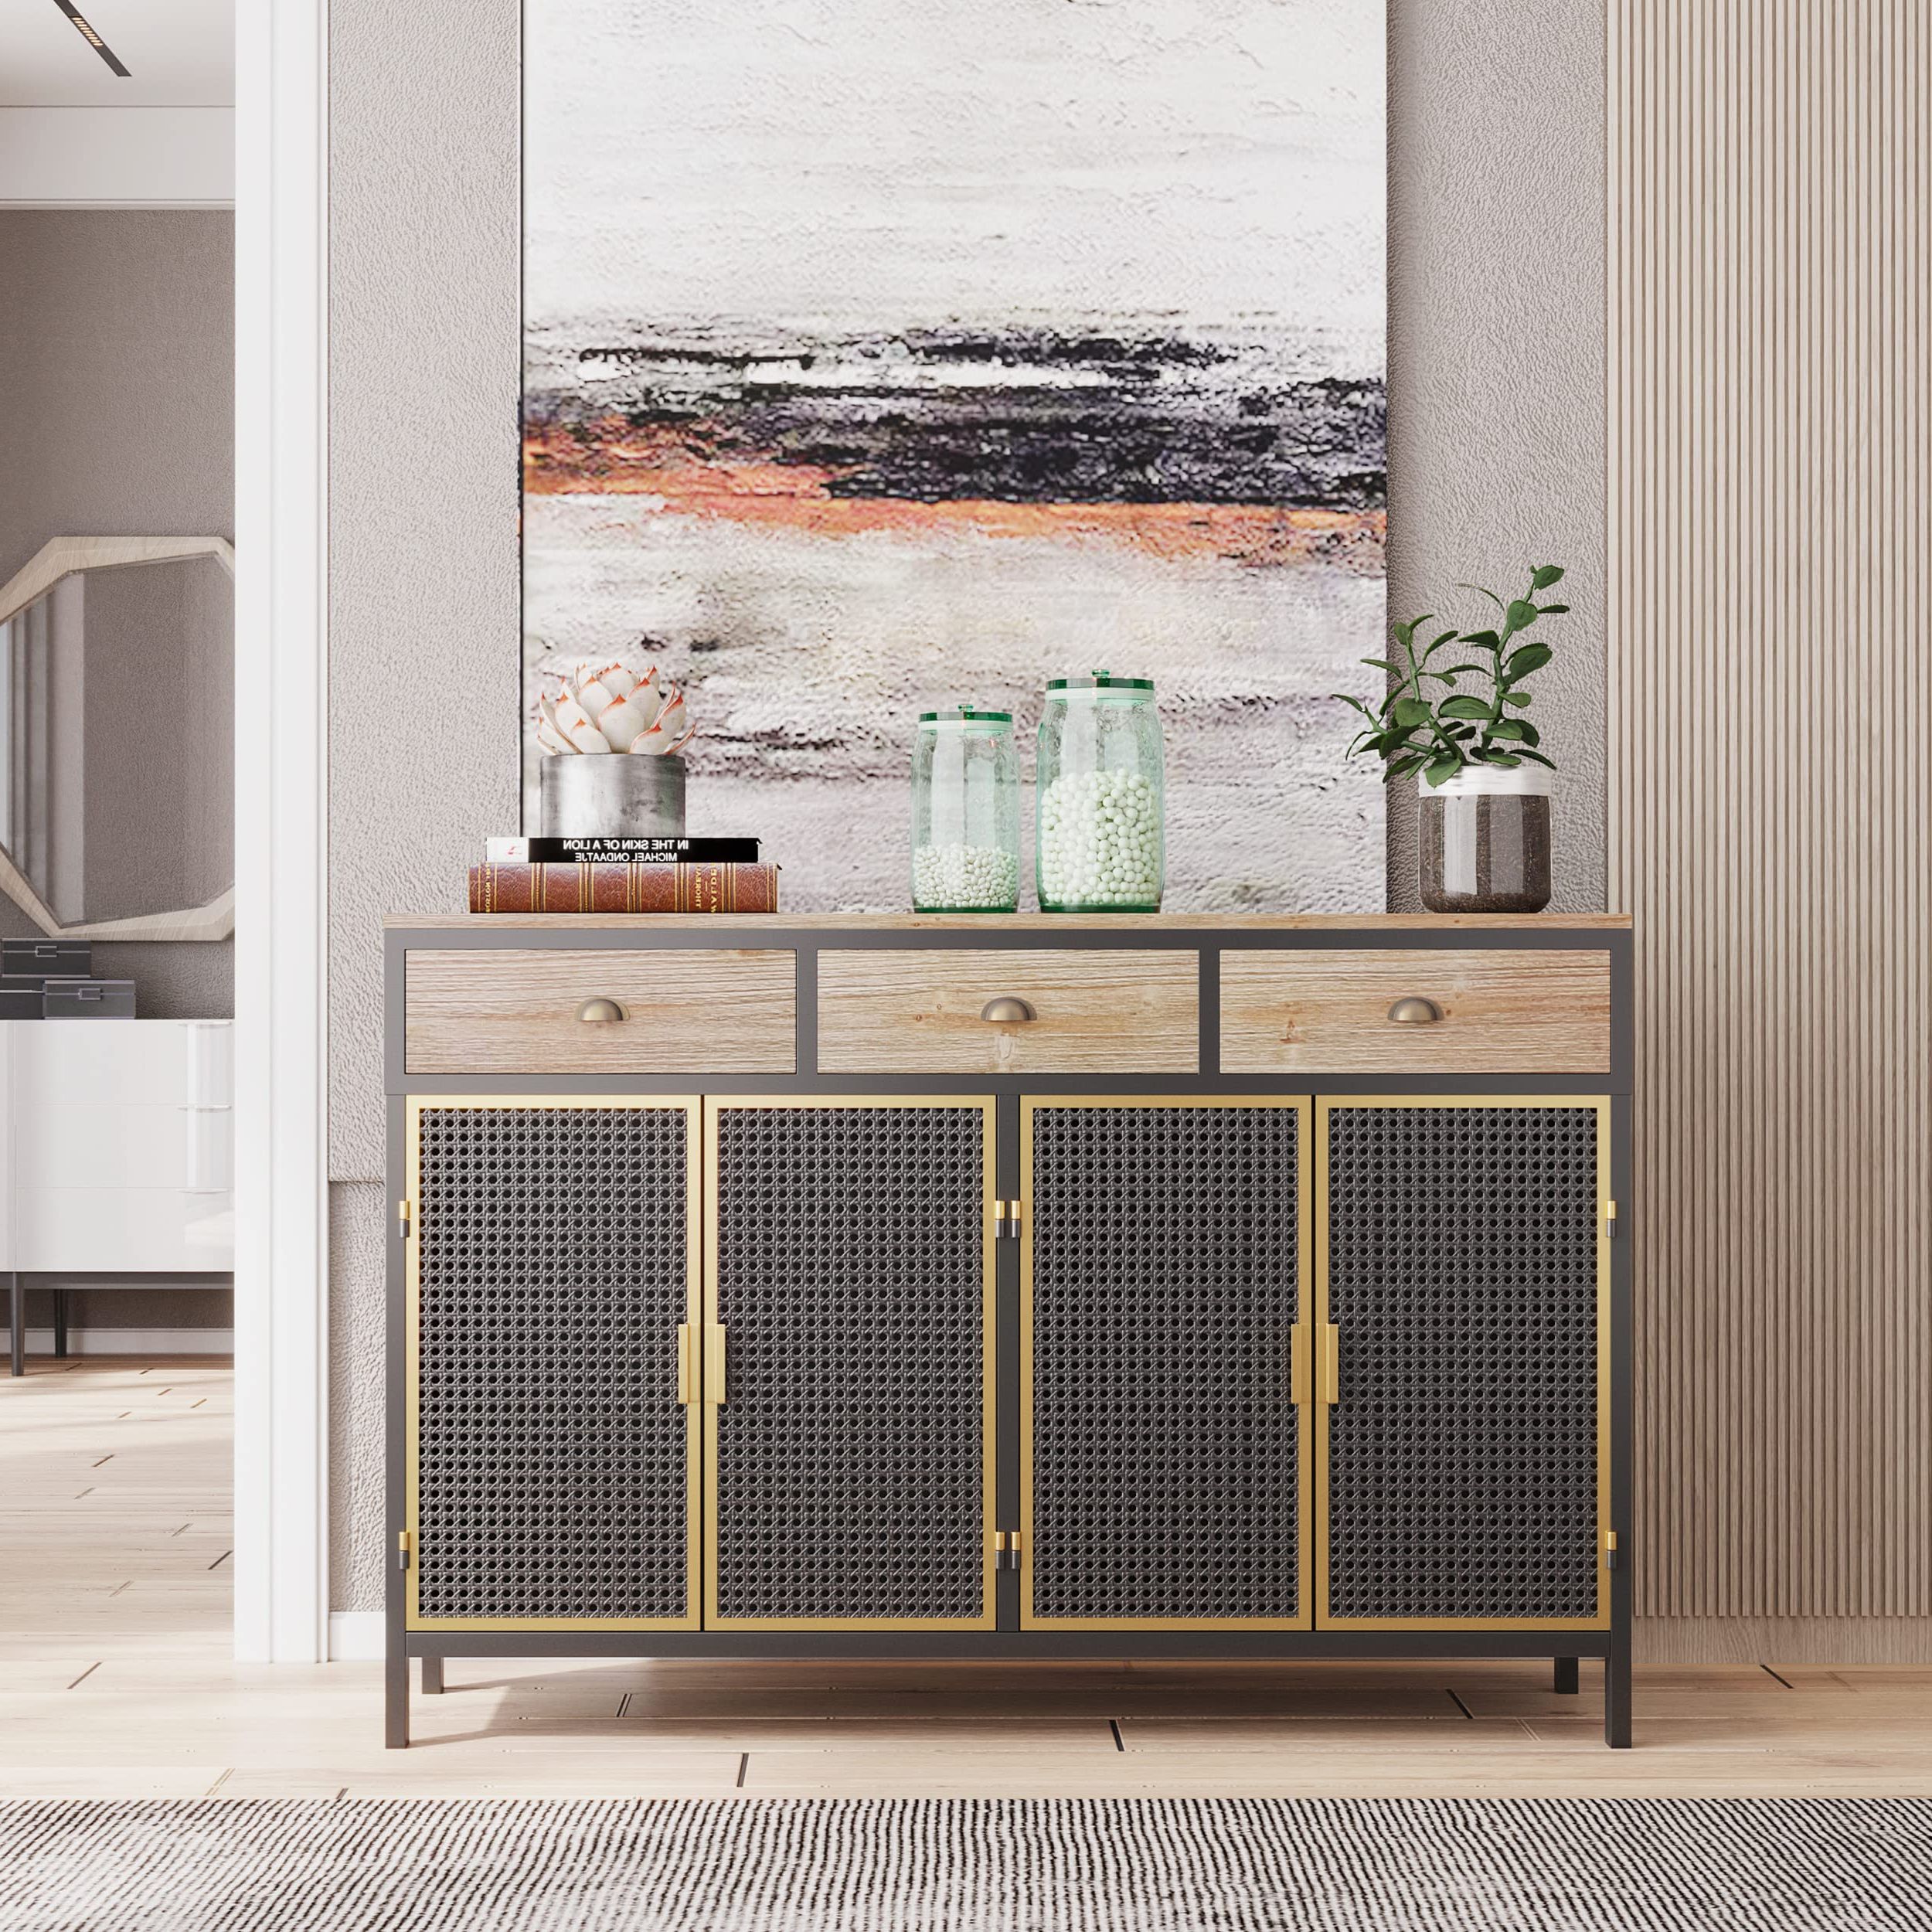 Widely Used Sideboards With Breathable Mesh Doors Inside Amazon: Lamerge Modern Sideboard,47.64" Wide Freestanding Storage  Cabinet With 2 Doors And 3 Top Drawers,carbonized Bamboo,breathable,for  Living Room Office Bedroom, Dark Grey (lms 47) : Home & Kitchen (Photo 5 of 10)